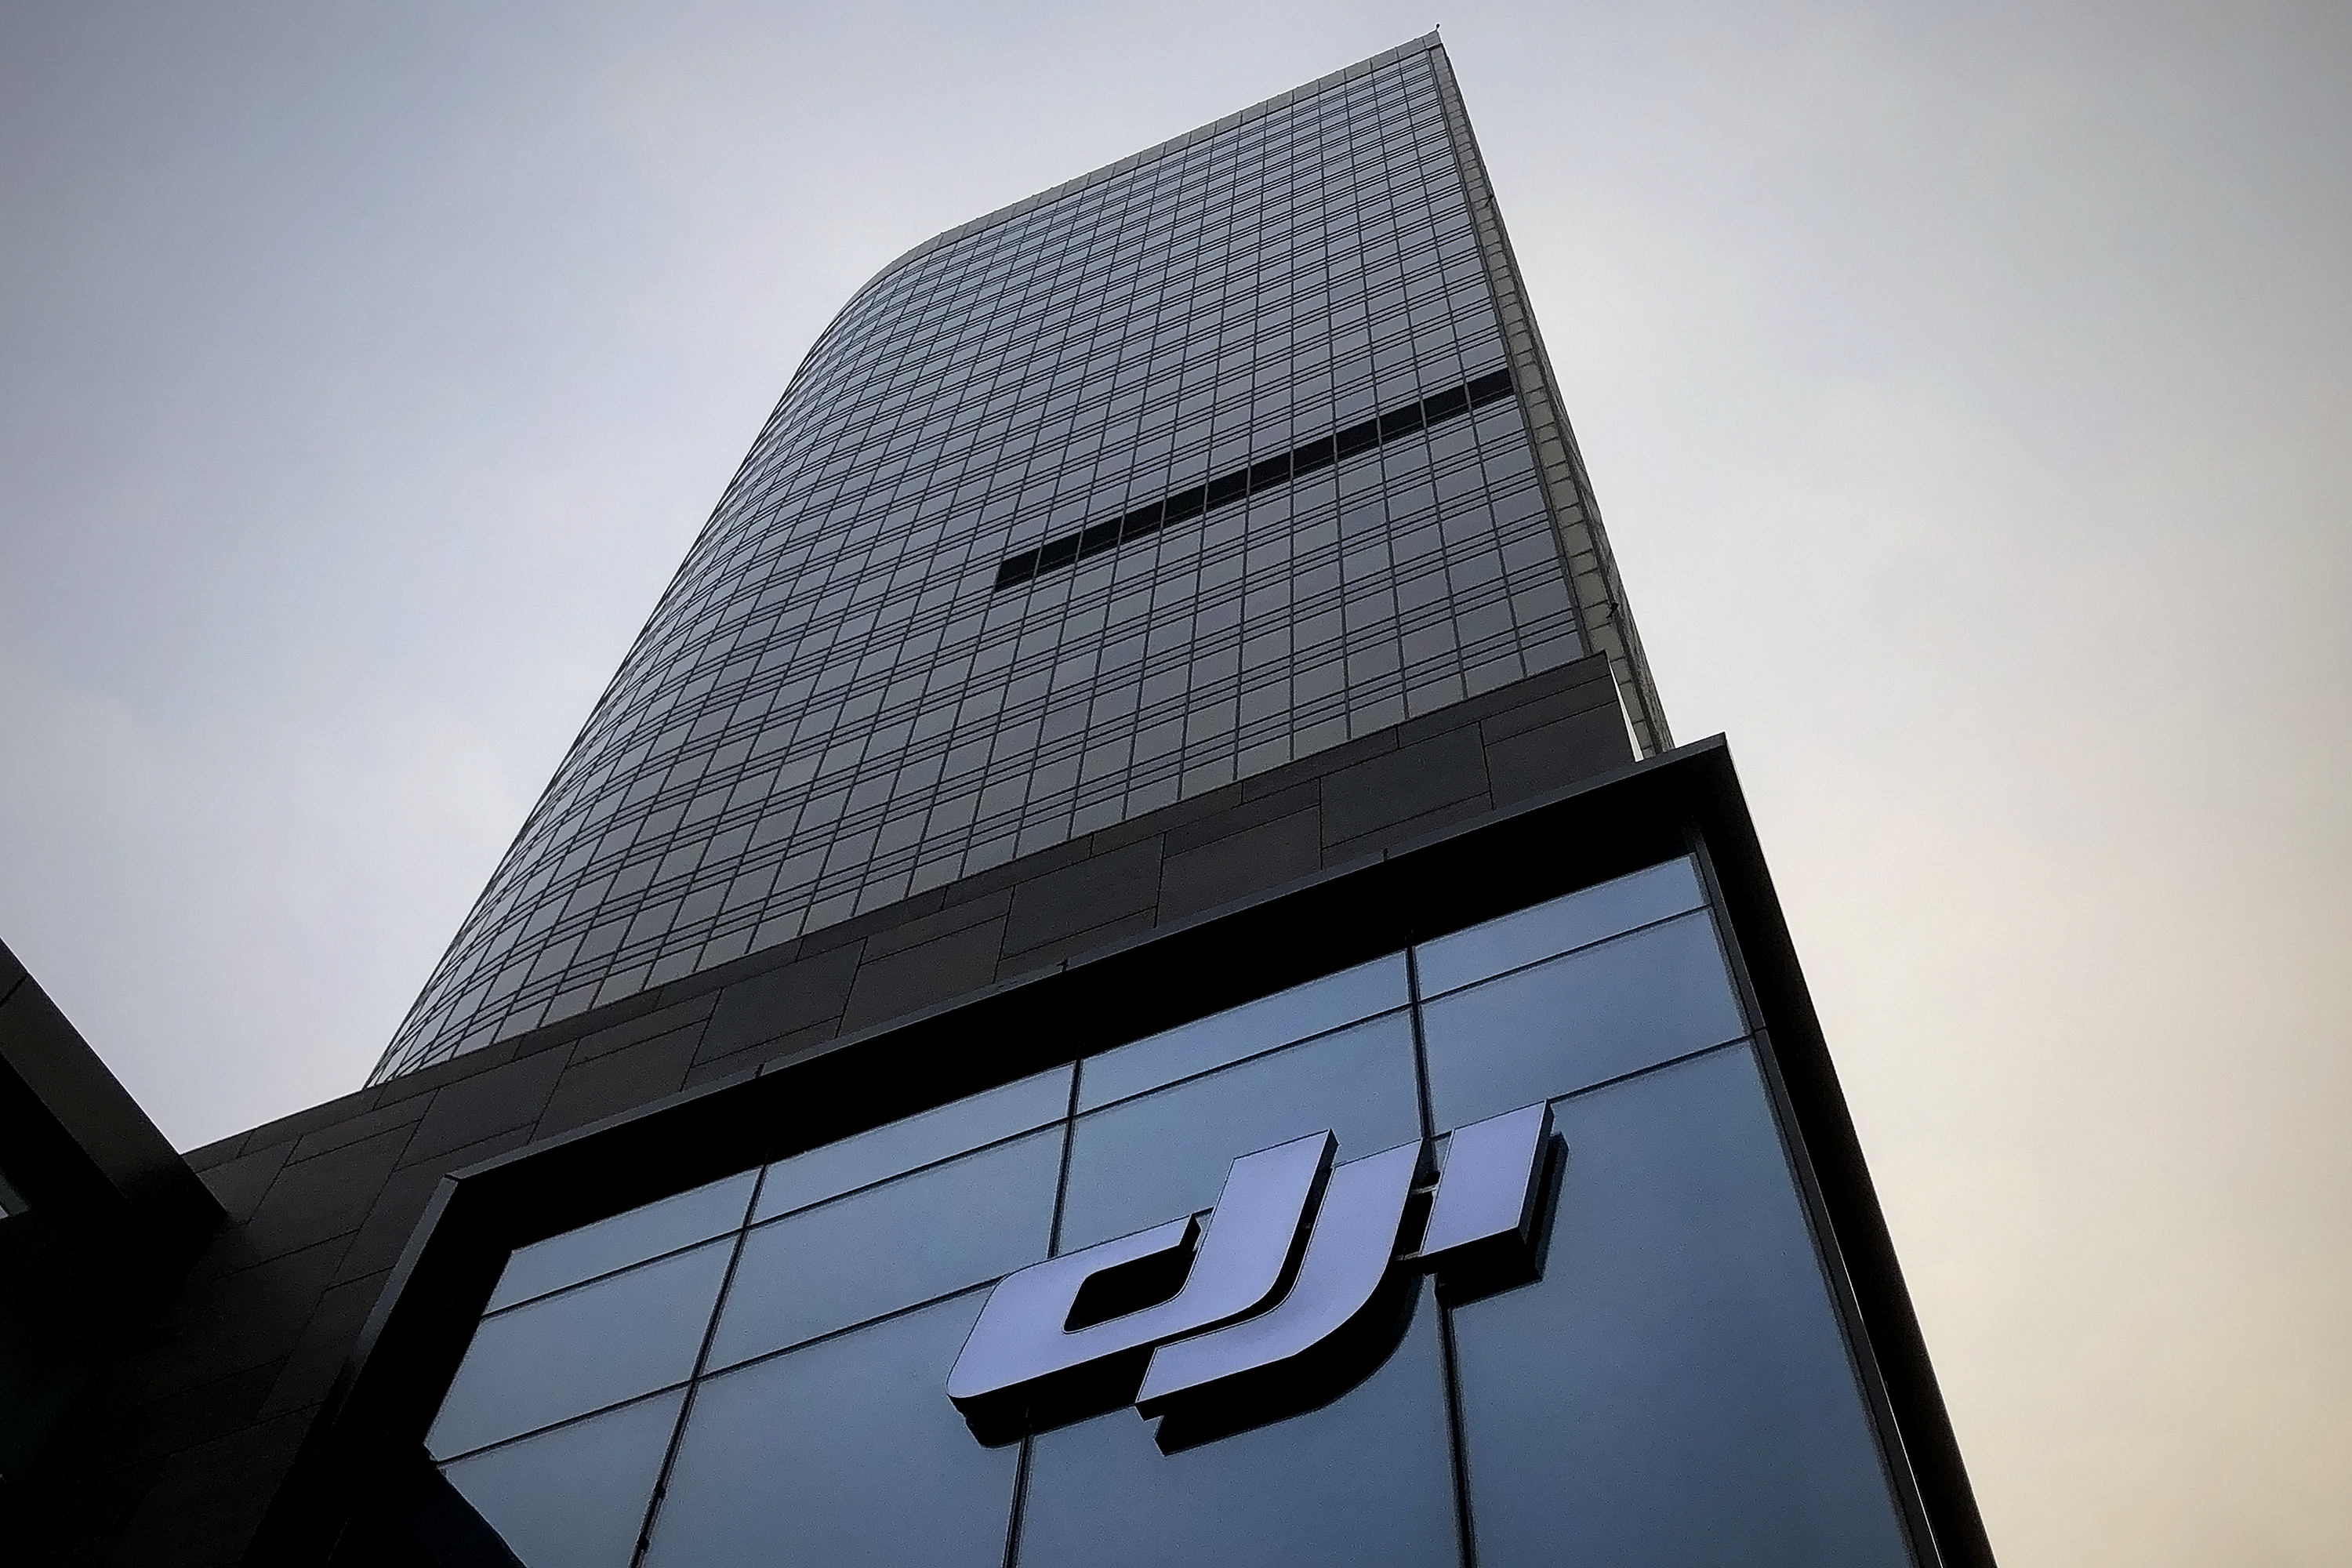 Leaked Pentagon Report Suggests DJI No Security Threat - Caixin Global